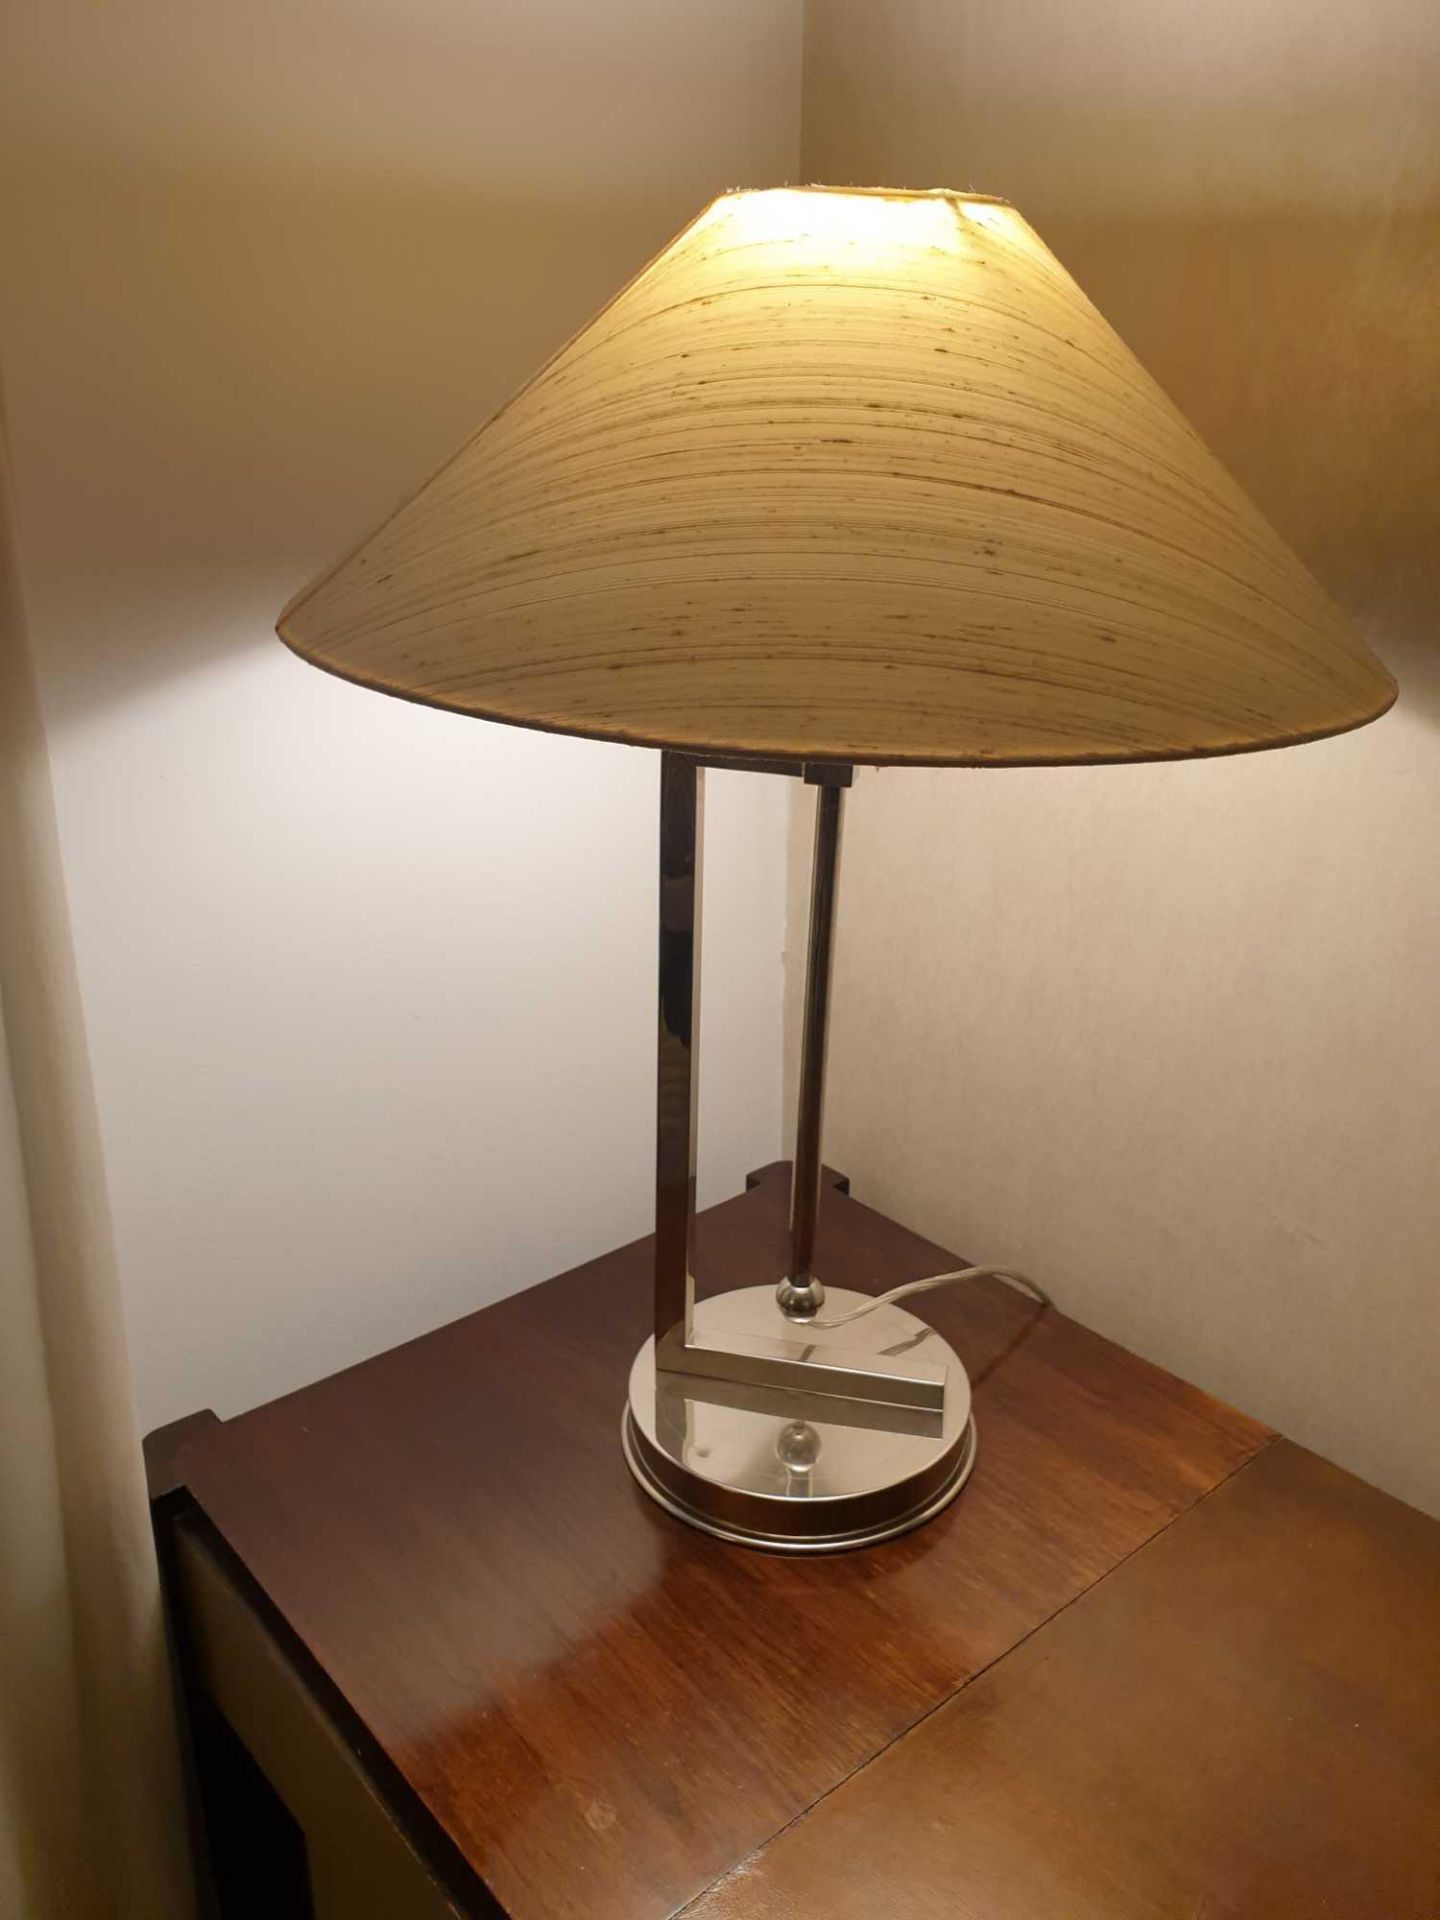 A Pair Of Polished Nickel Table Lamps Circular Base And Double Stem Single Bulb With Cylindrical